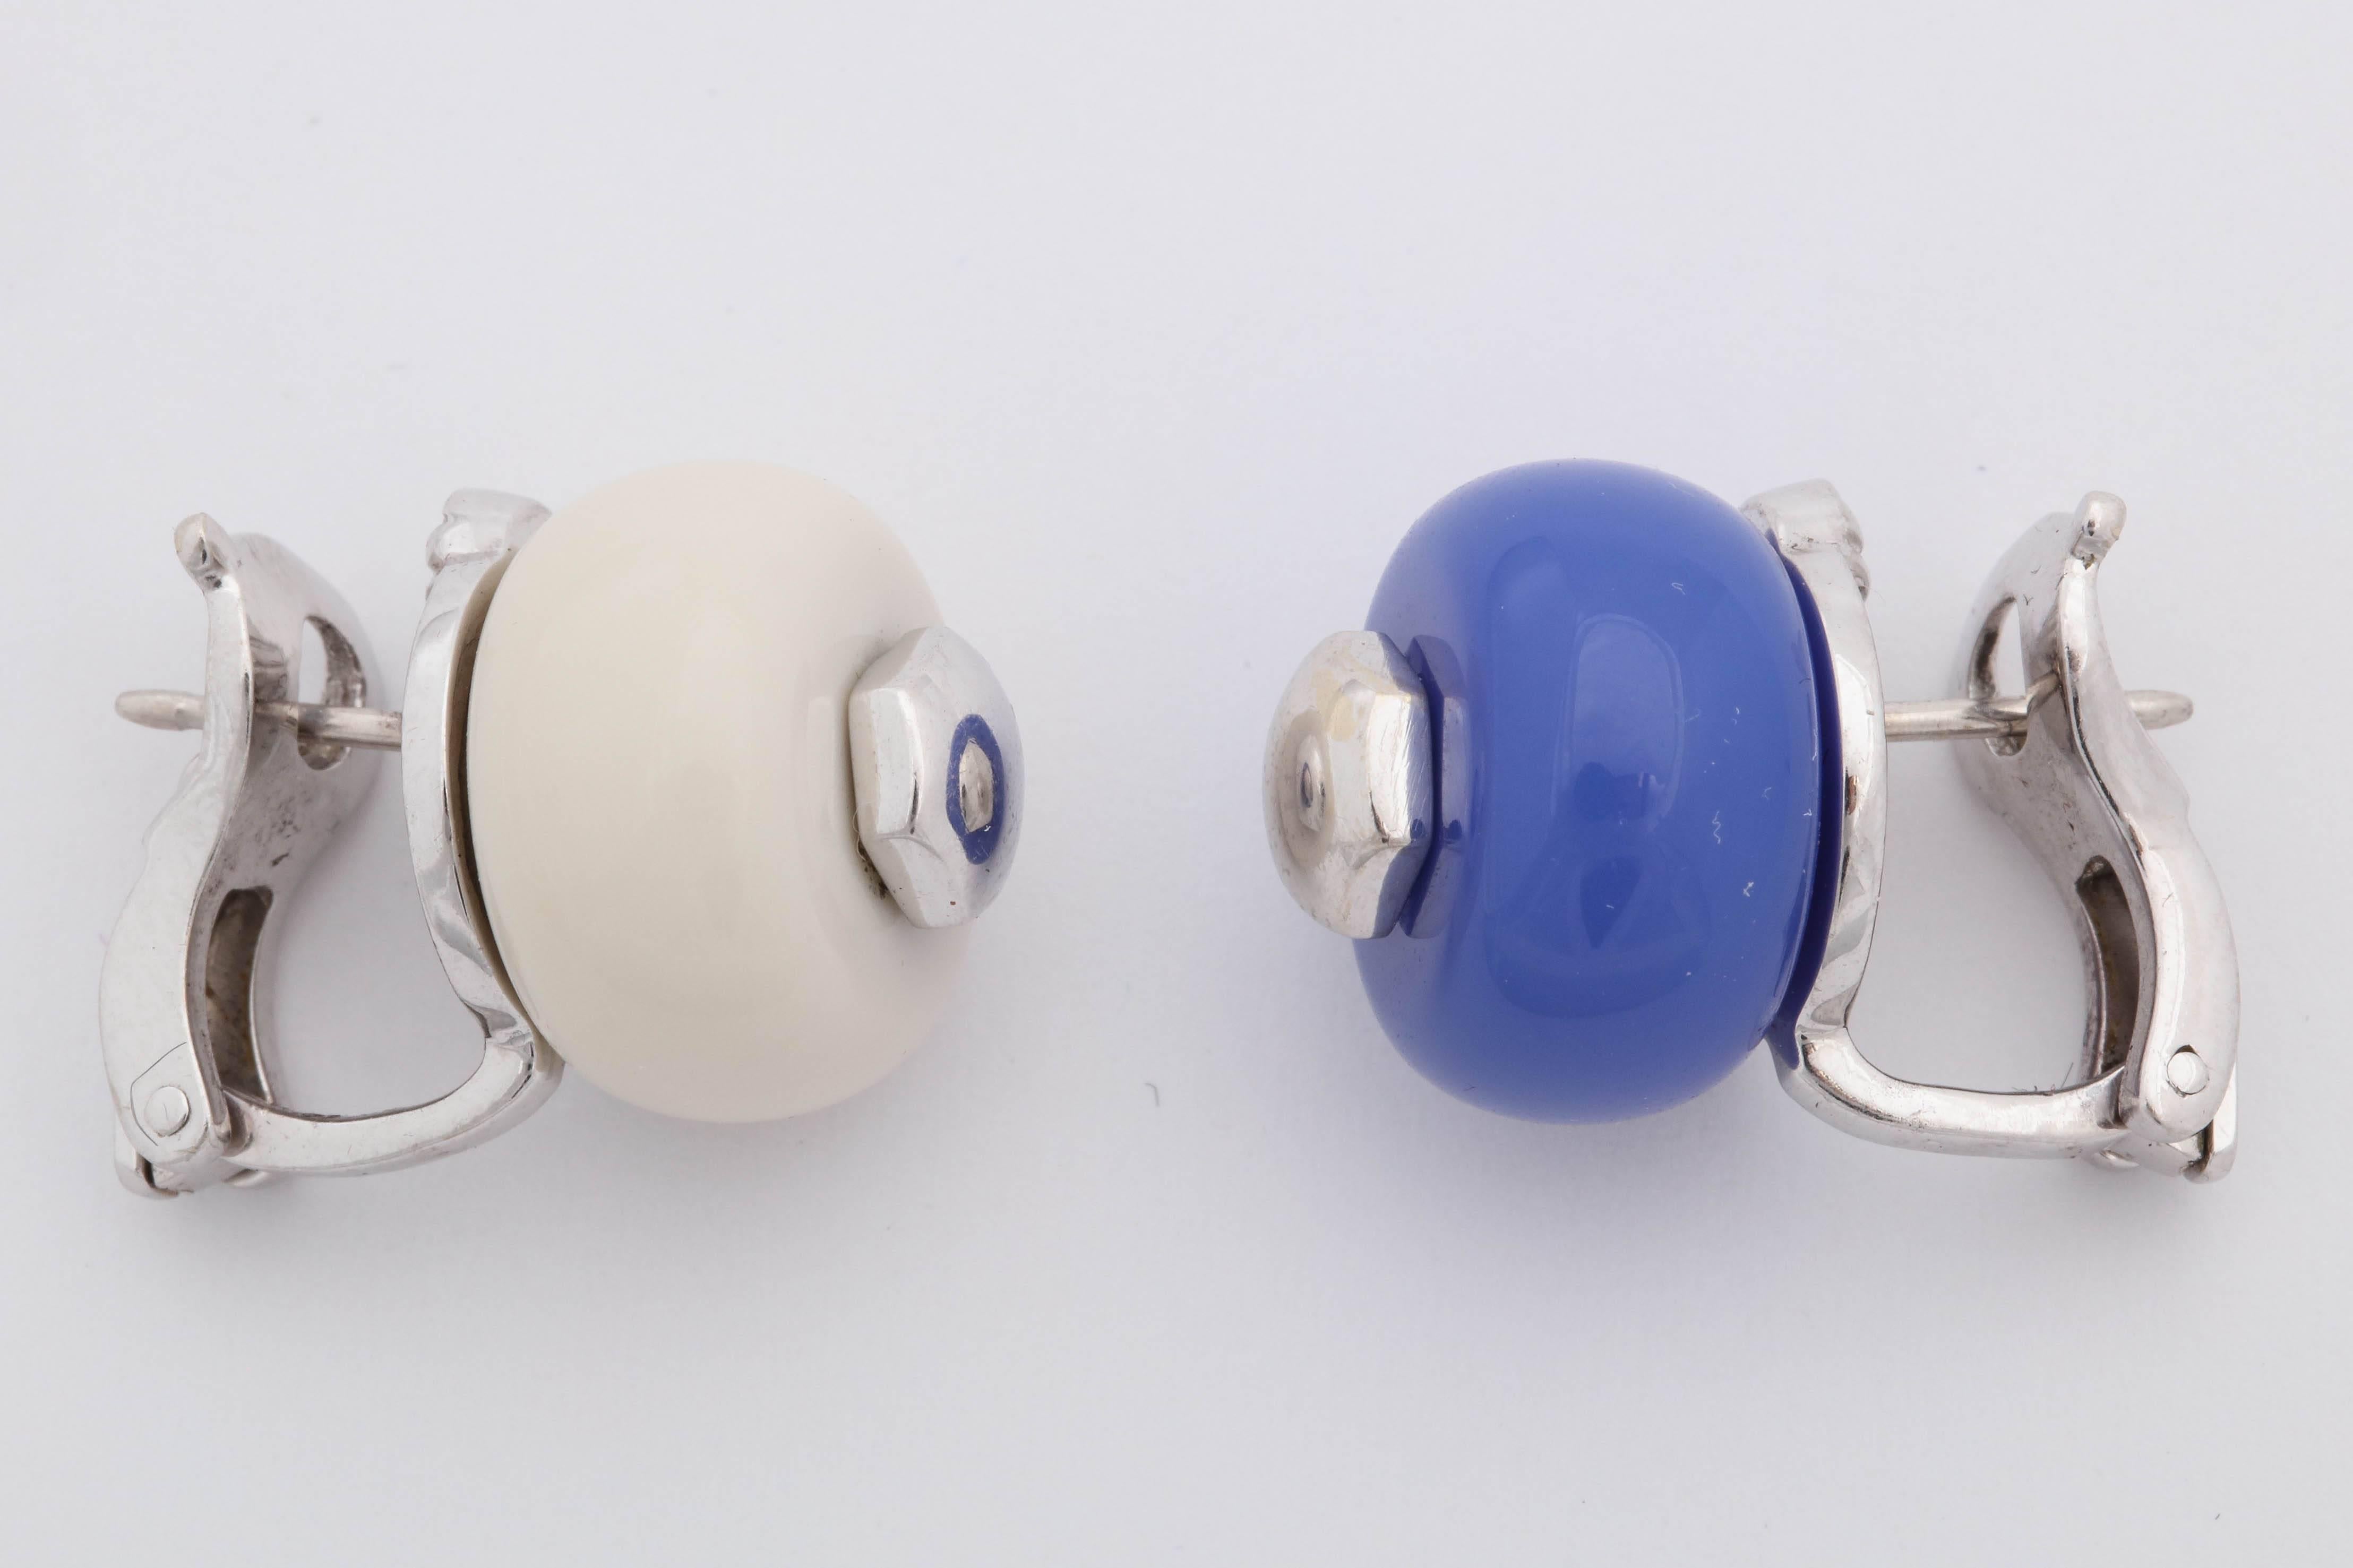 One Pair Of Ladies 18kt White Gold Earclips With Posts,Embellished With One blue Chaceldony Measuring approximately 12 MM And With One Circular Cut white agate Measuring approximately 12 MM . Each Stone Designed With One White Gold Stud